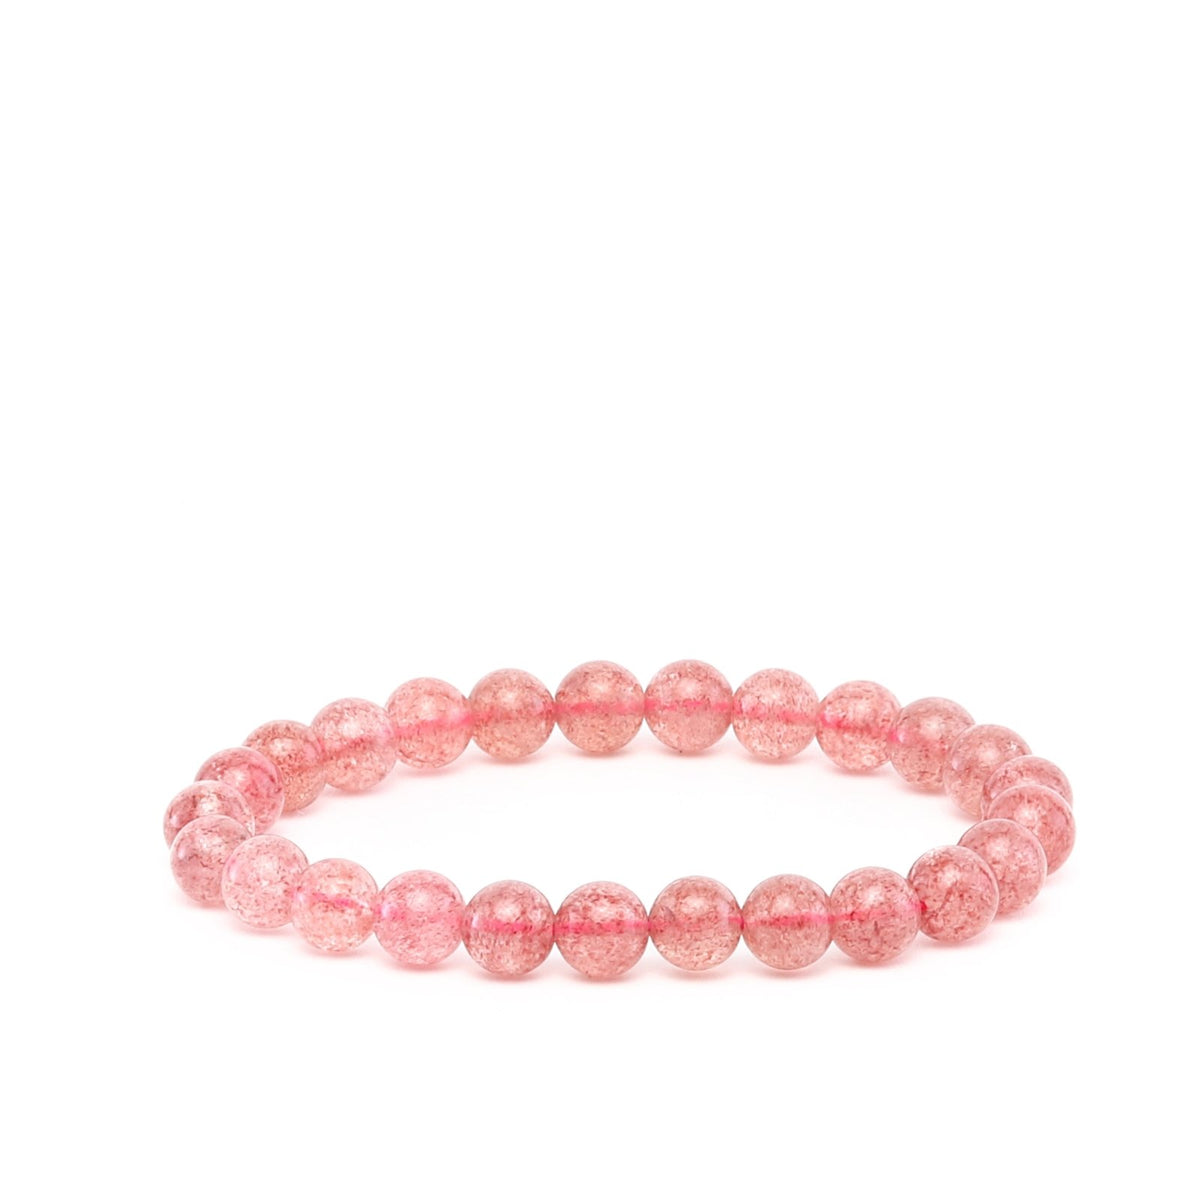 DearBracelet-Natural Small Faceted Strawberry Quartz Bracelet, about 3mm  Beads with 2inches(5cm) Gold-plated Stainless Steel Chain, Priced